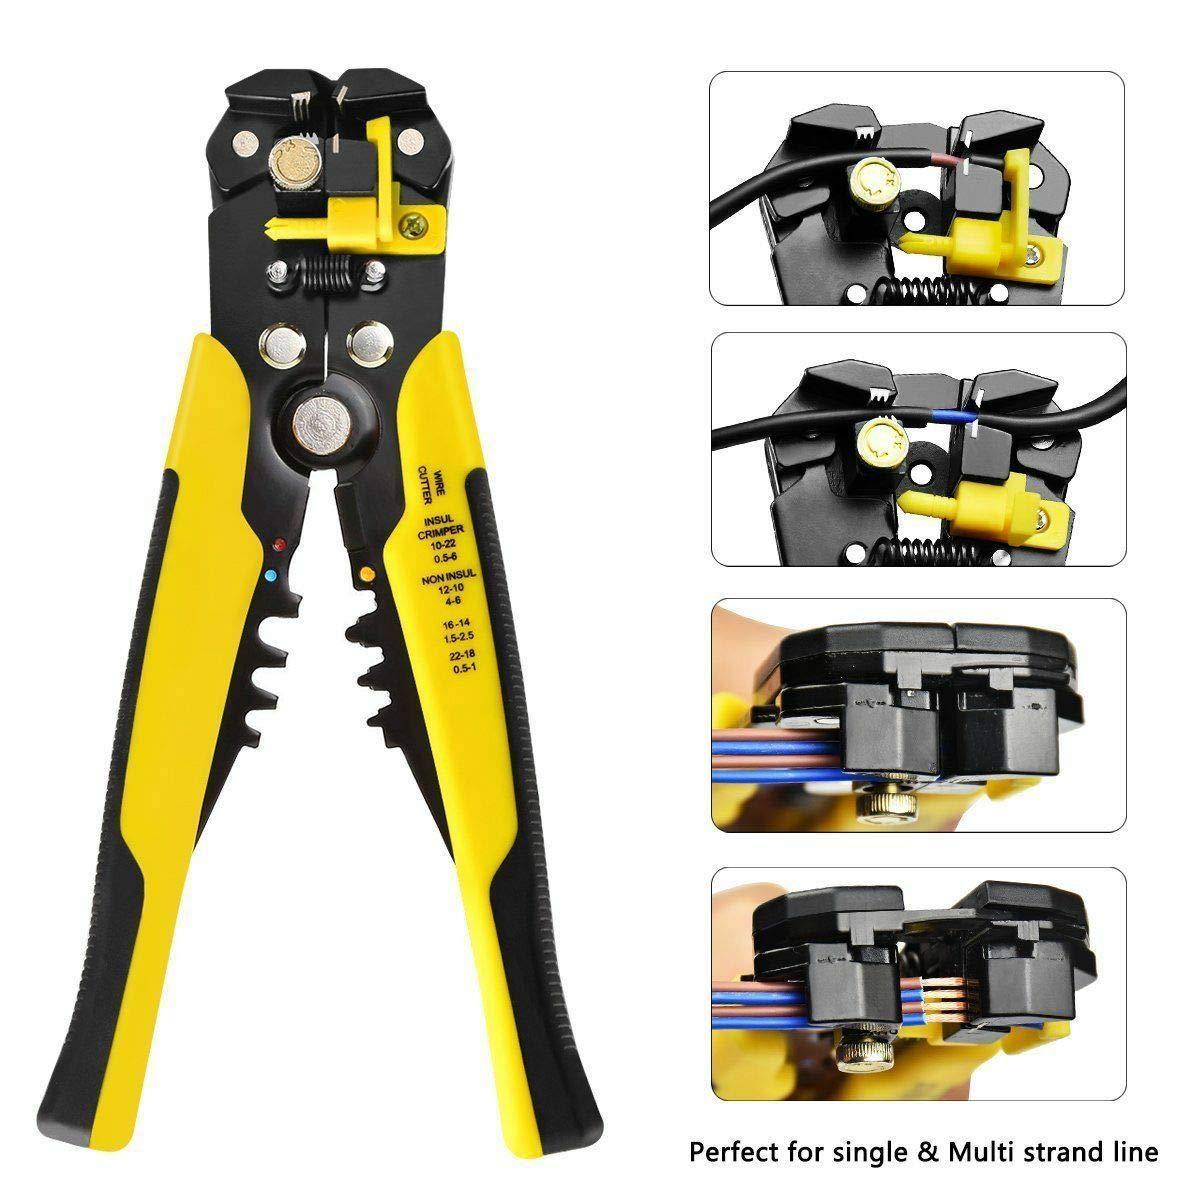 Supply 5-in-1 Multifunctional Wire Stripper Automatic Wire Stripper Wire Stripper Scissors Press Plier Wire Crimper Disassembling Tools Special Offer